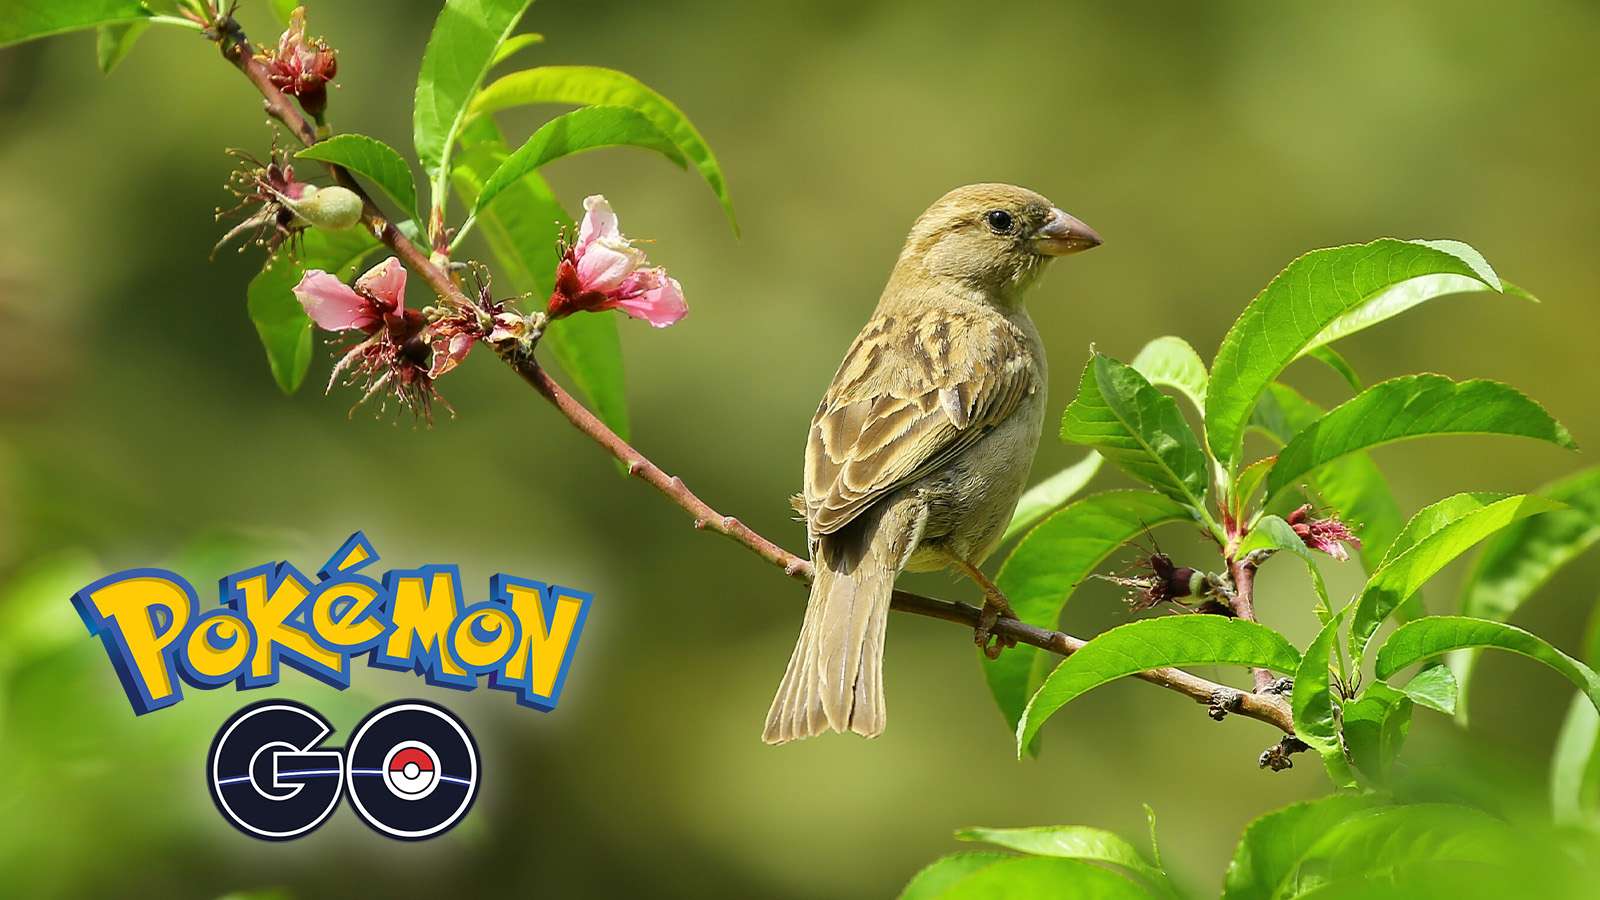 pokemon go logo on a picture of a bird